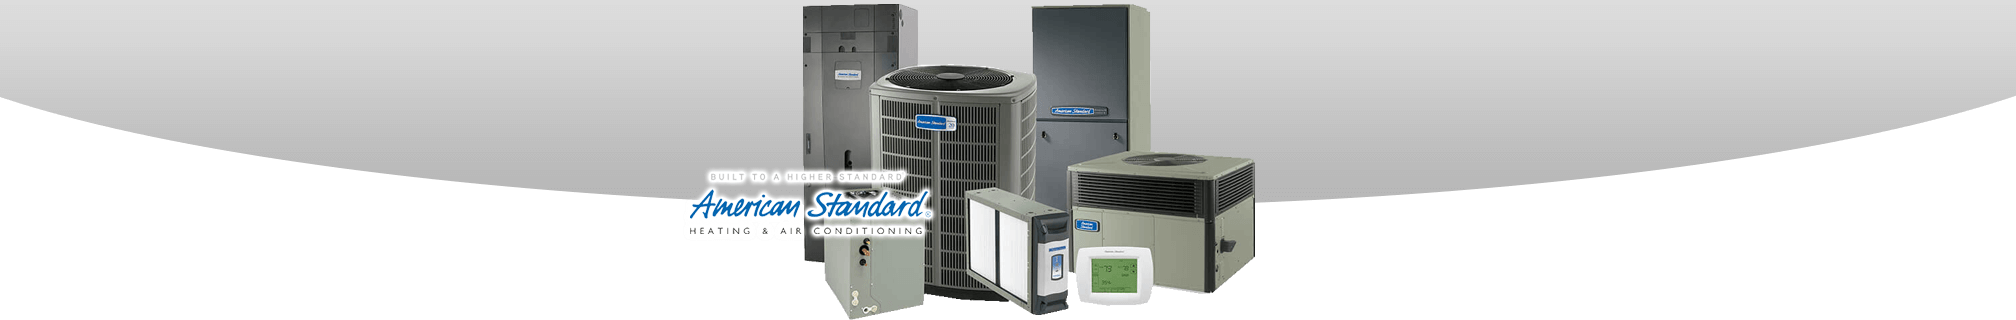 Get your Amana Furnace units service done in Chattanooga TN by AirSystems Unlimited